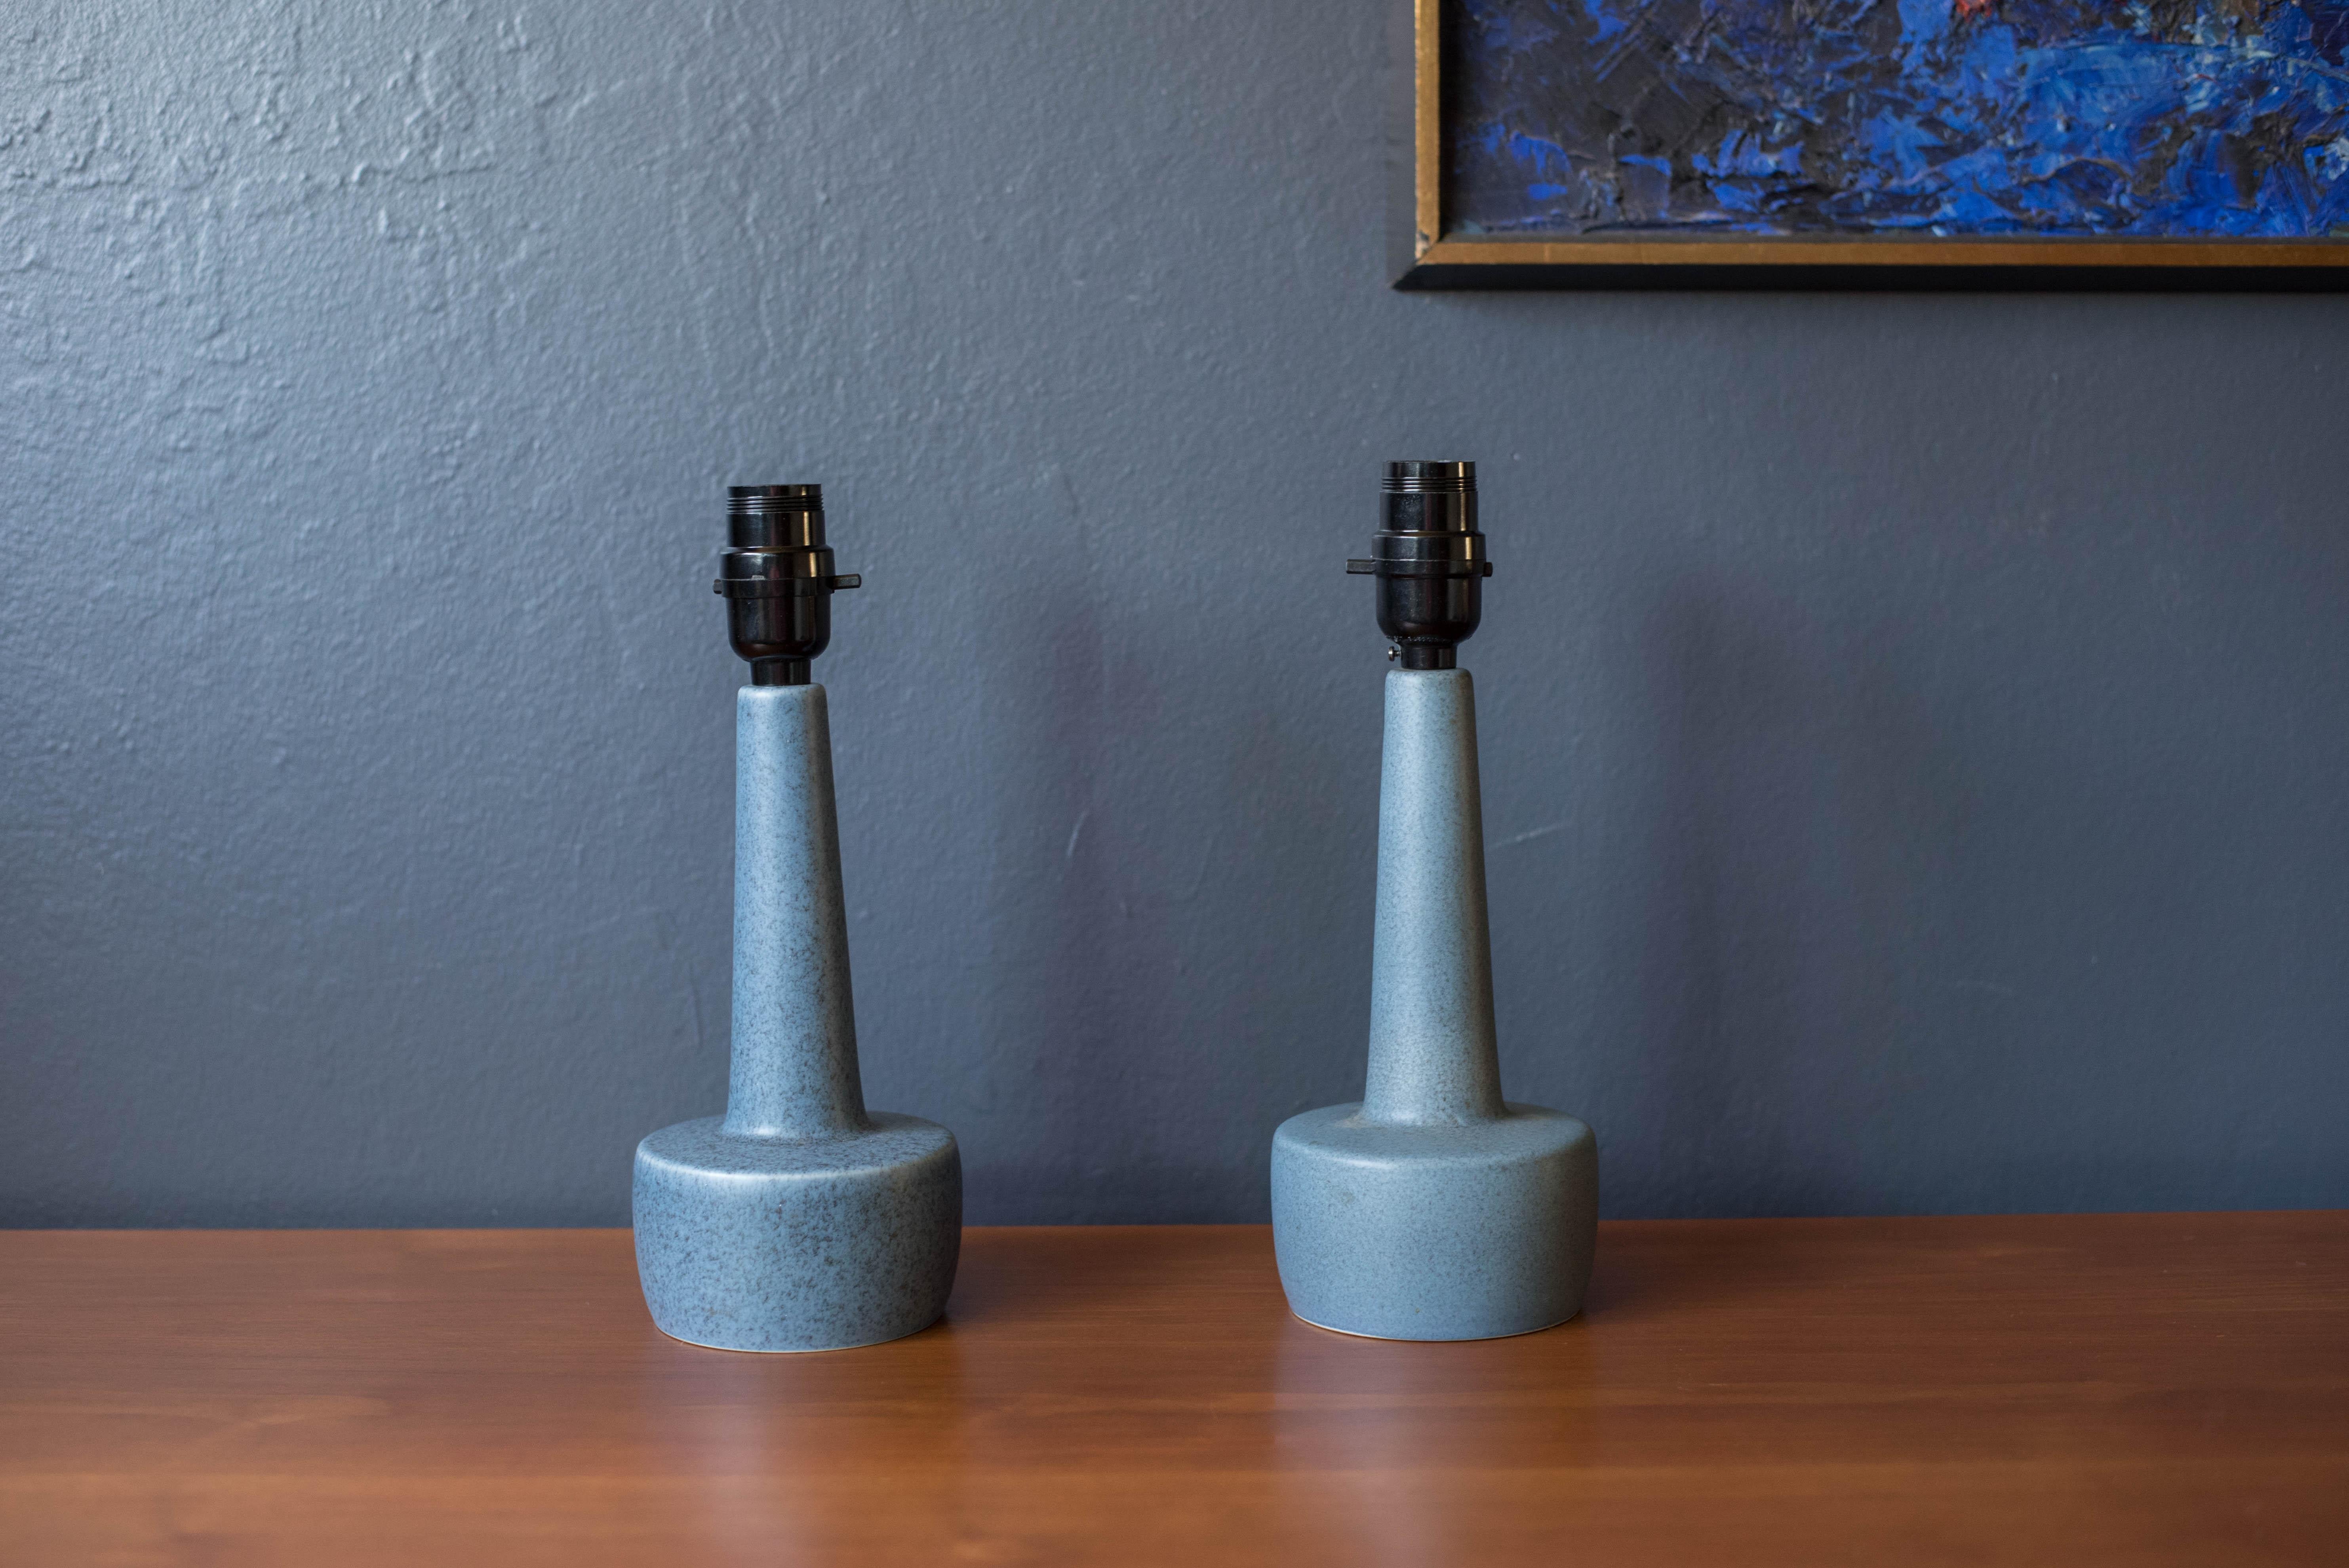 Mid-Century Modern pair of ceramic blue stoneware lamps manufactured by Soholm, Denmark. This pair features a speckled matte light blue glaze and have been rewired for the US. Marked 972 RA.



Offered by Mid Century Maddist